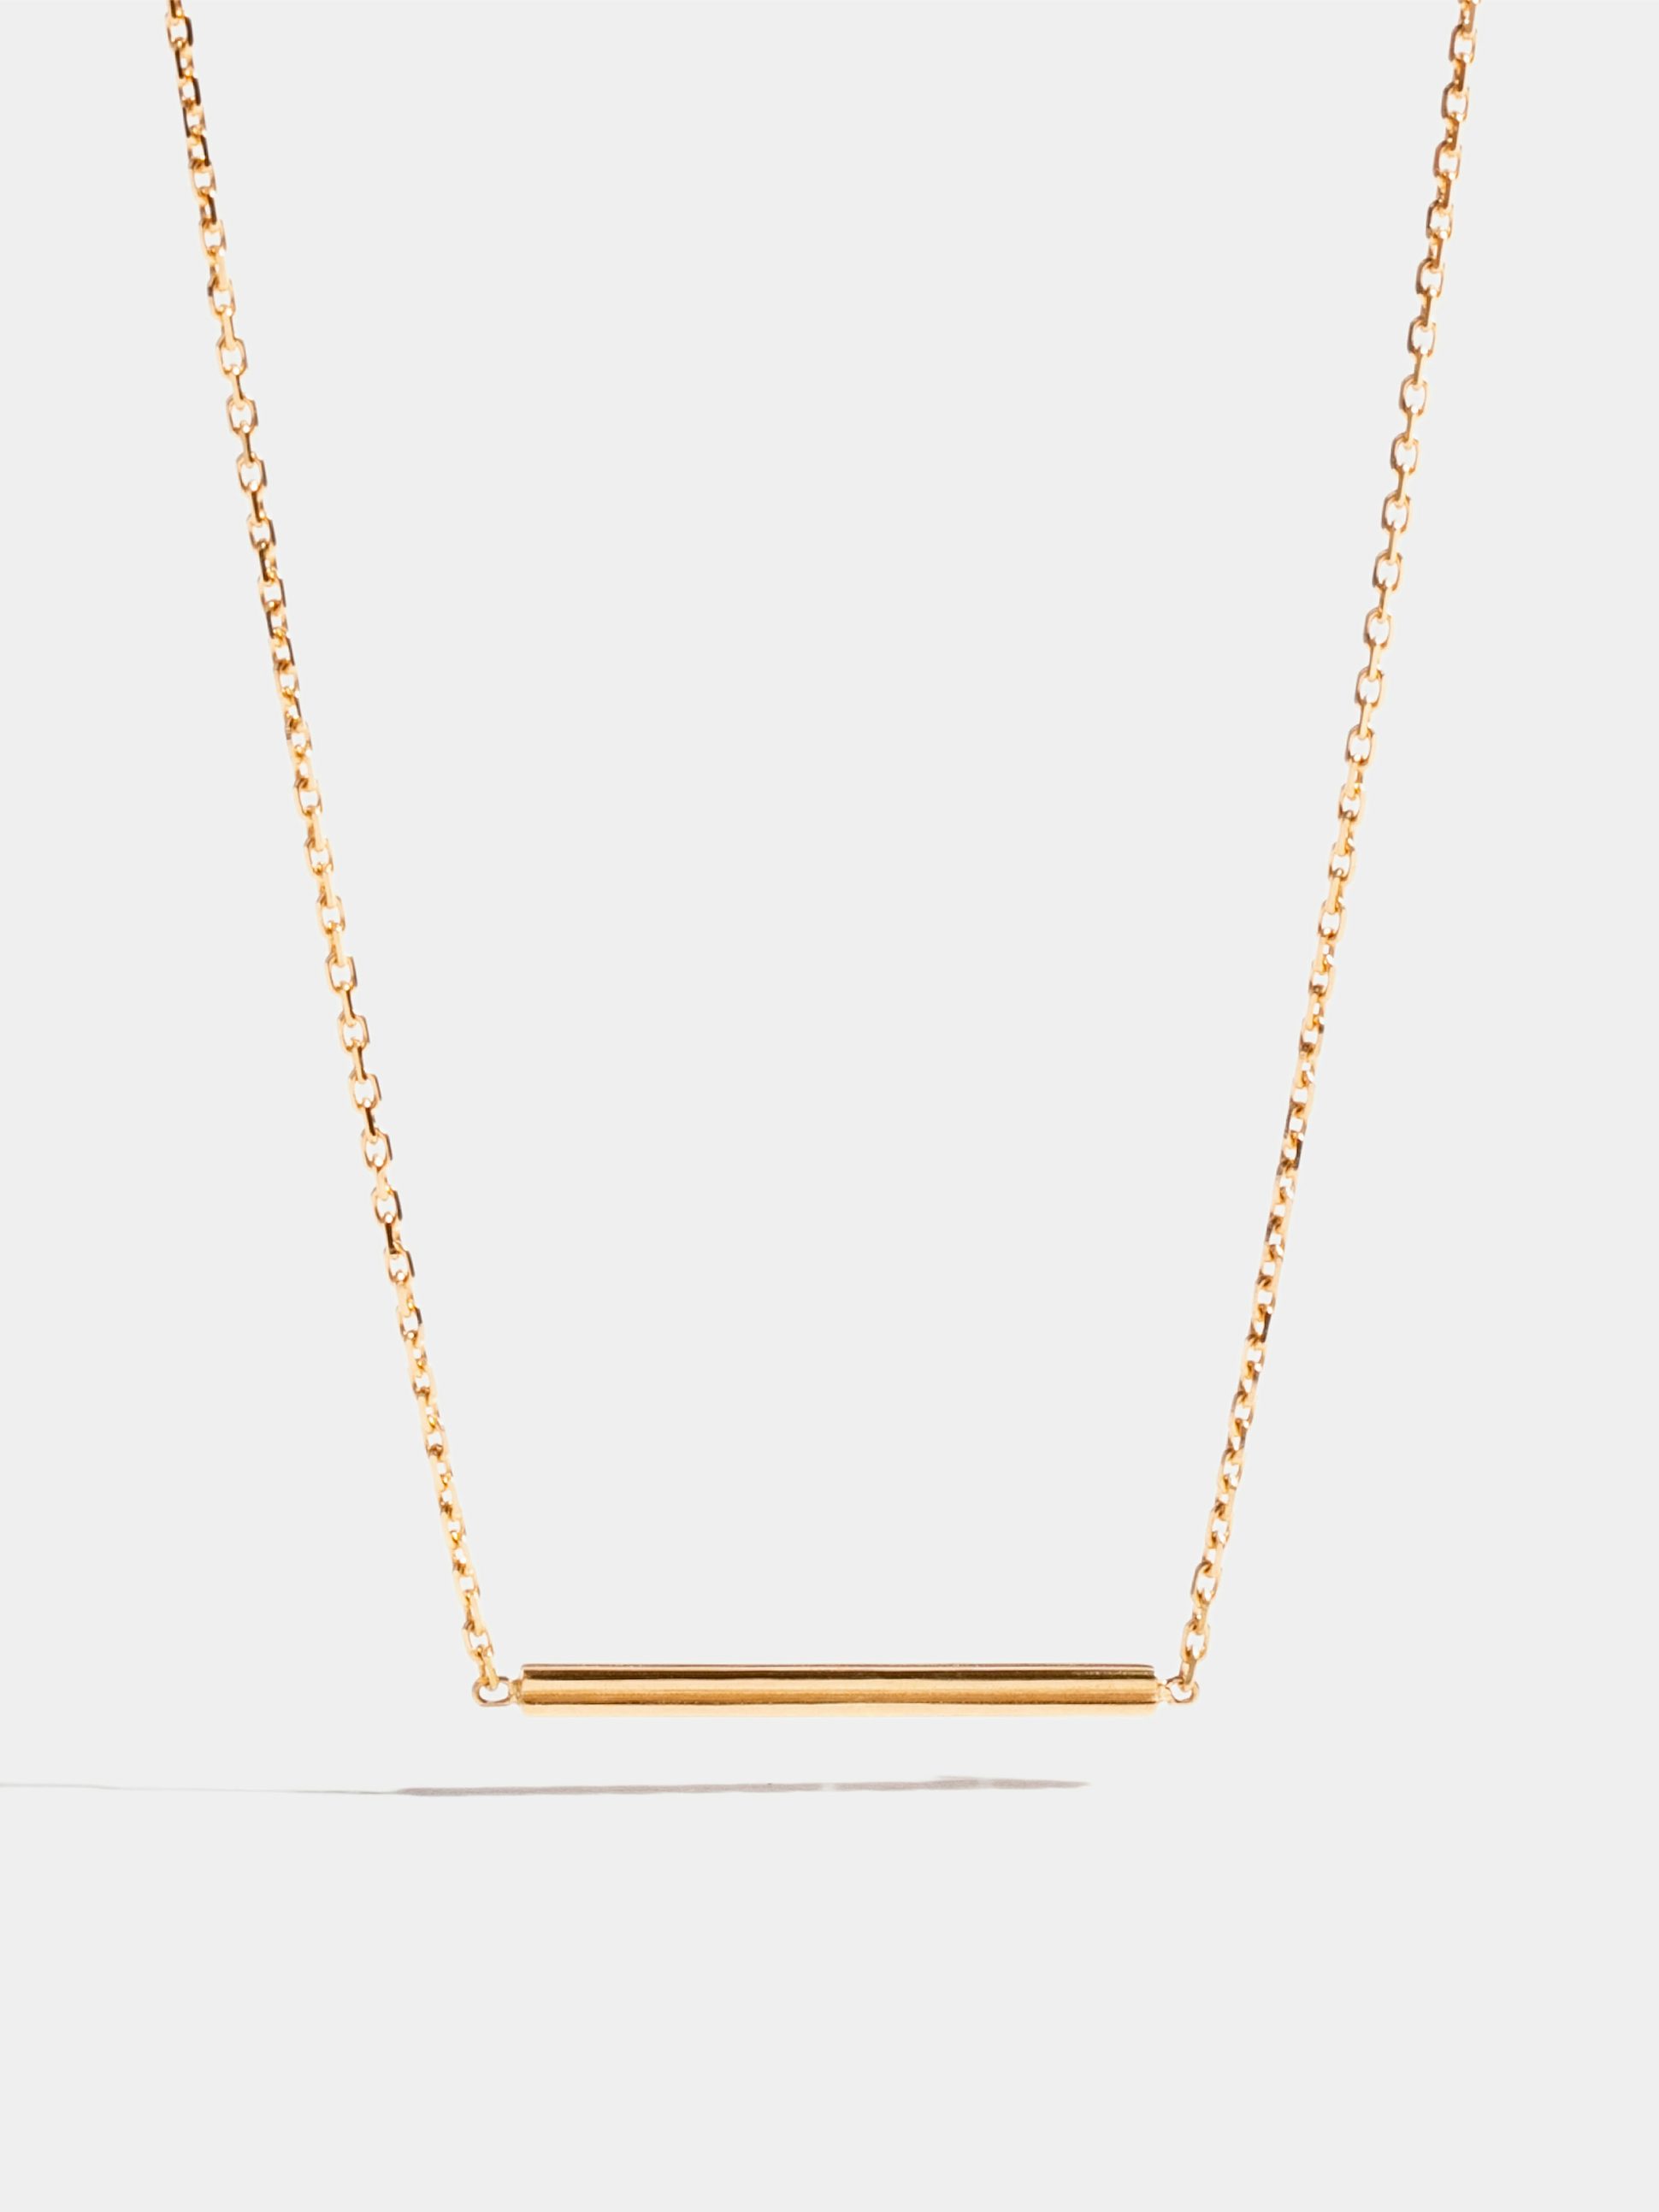 Anagramme "double jonc" motif in yellow gold 18k Fairmined ethical, on 42 cm chain